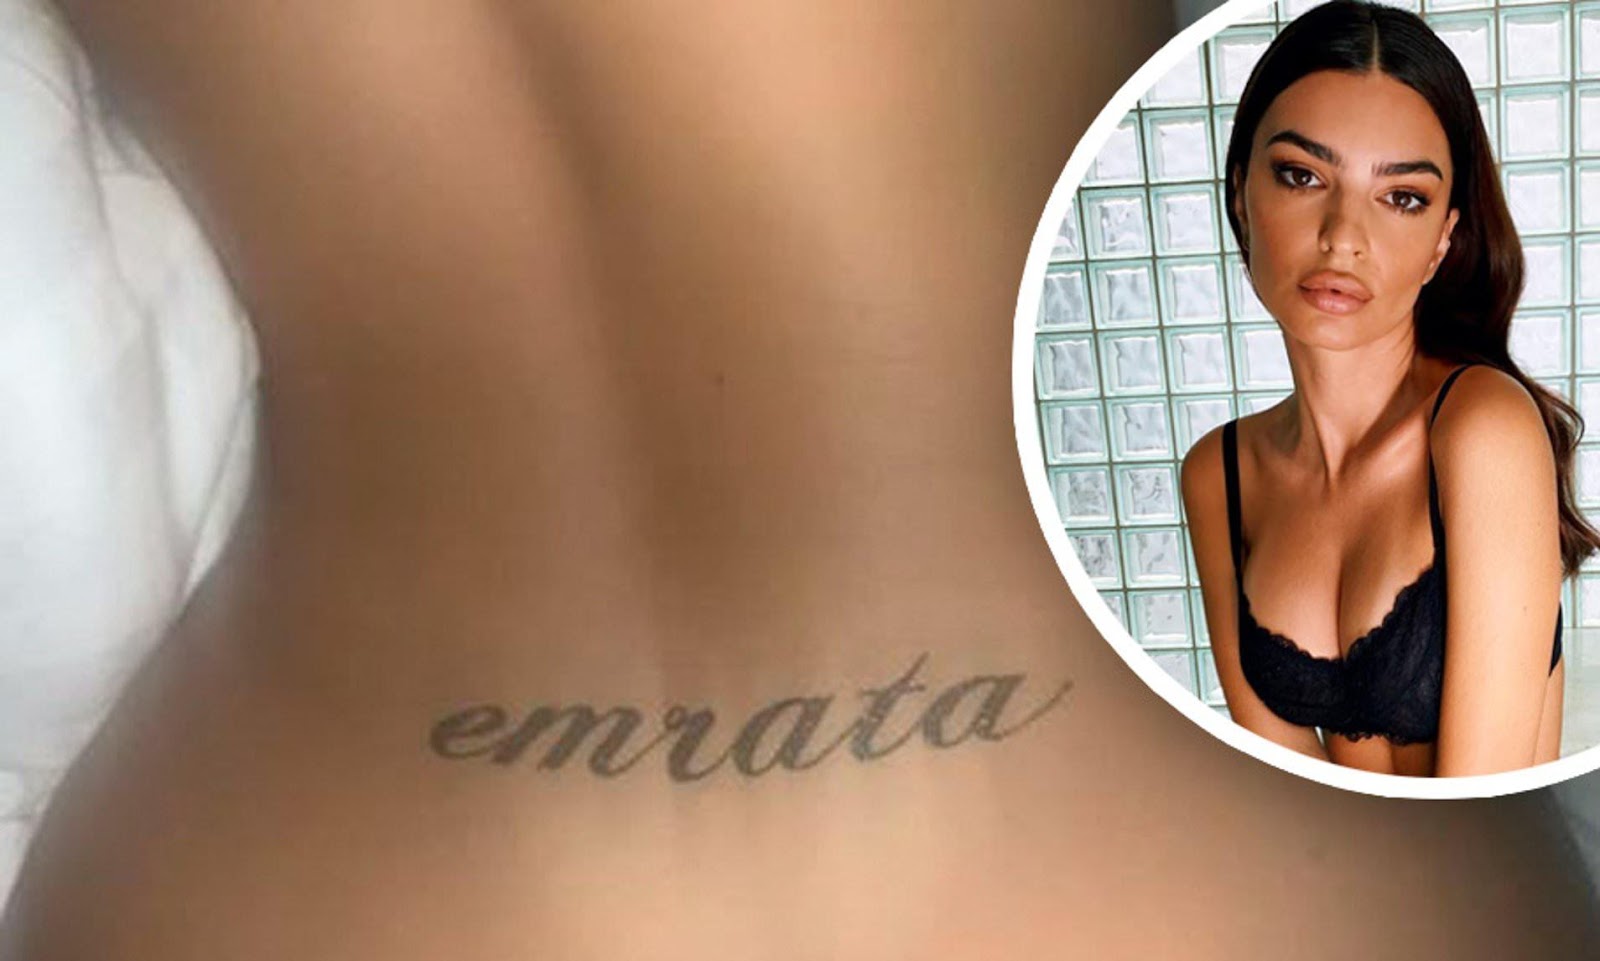 Emily Ratajkowski shows off a new temporary lower back tattoo in a risqué  snap | Daily Mail Online